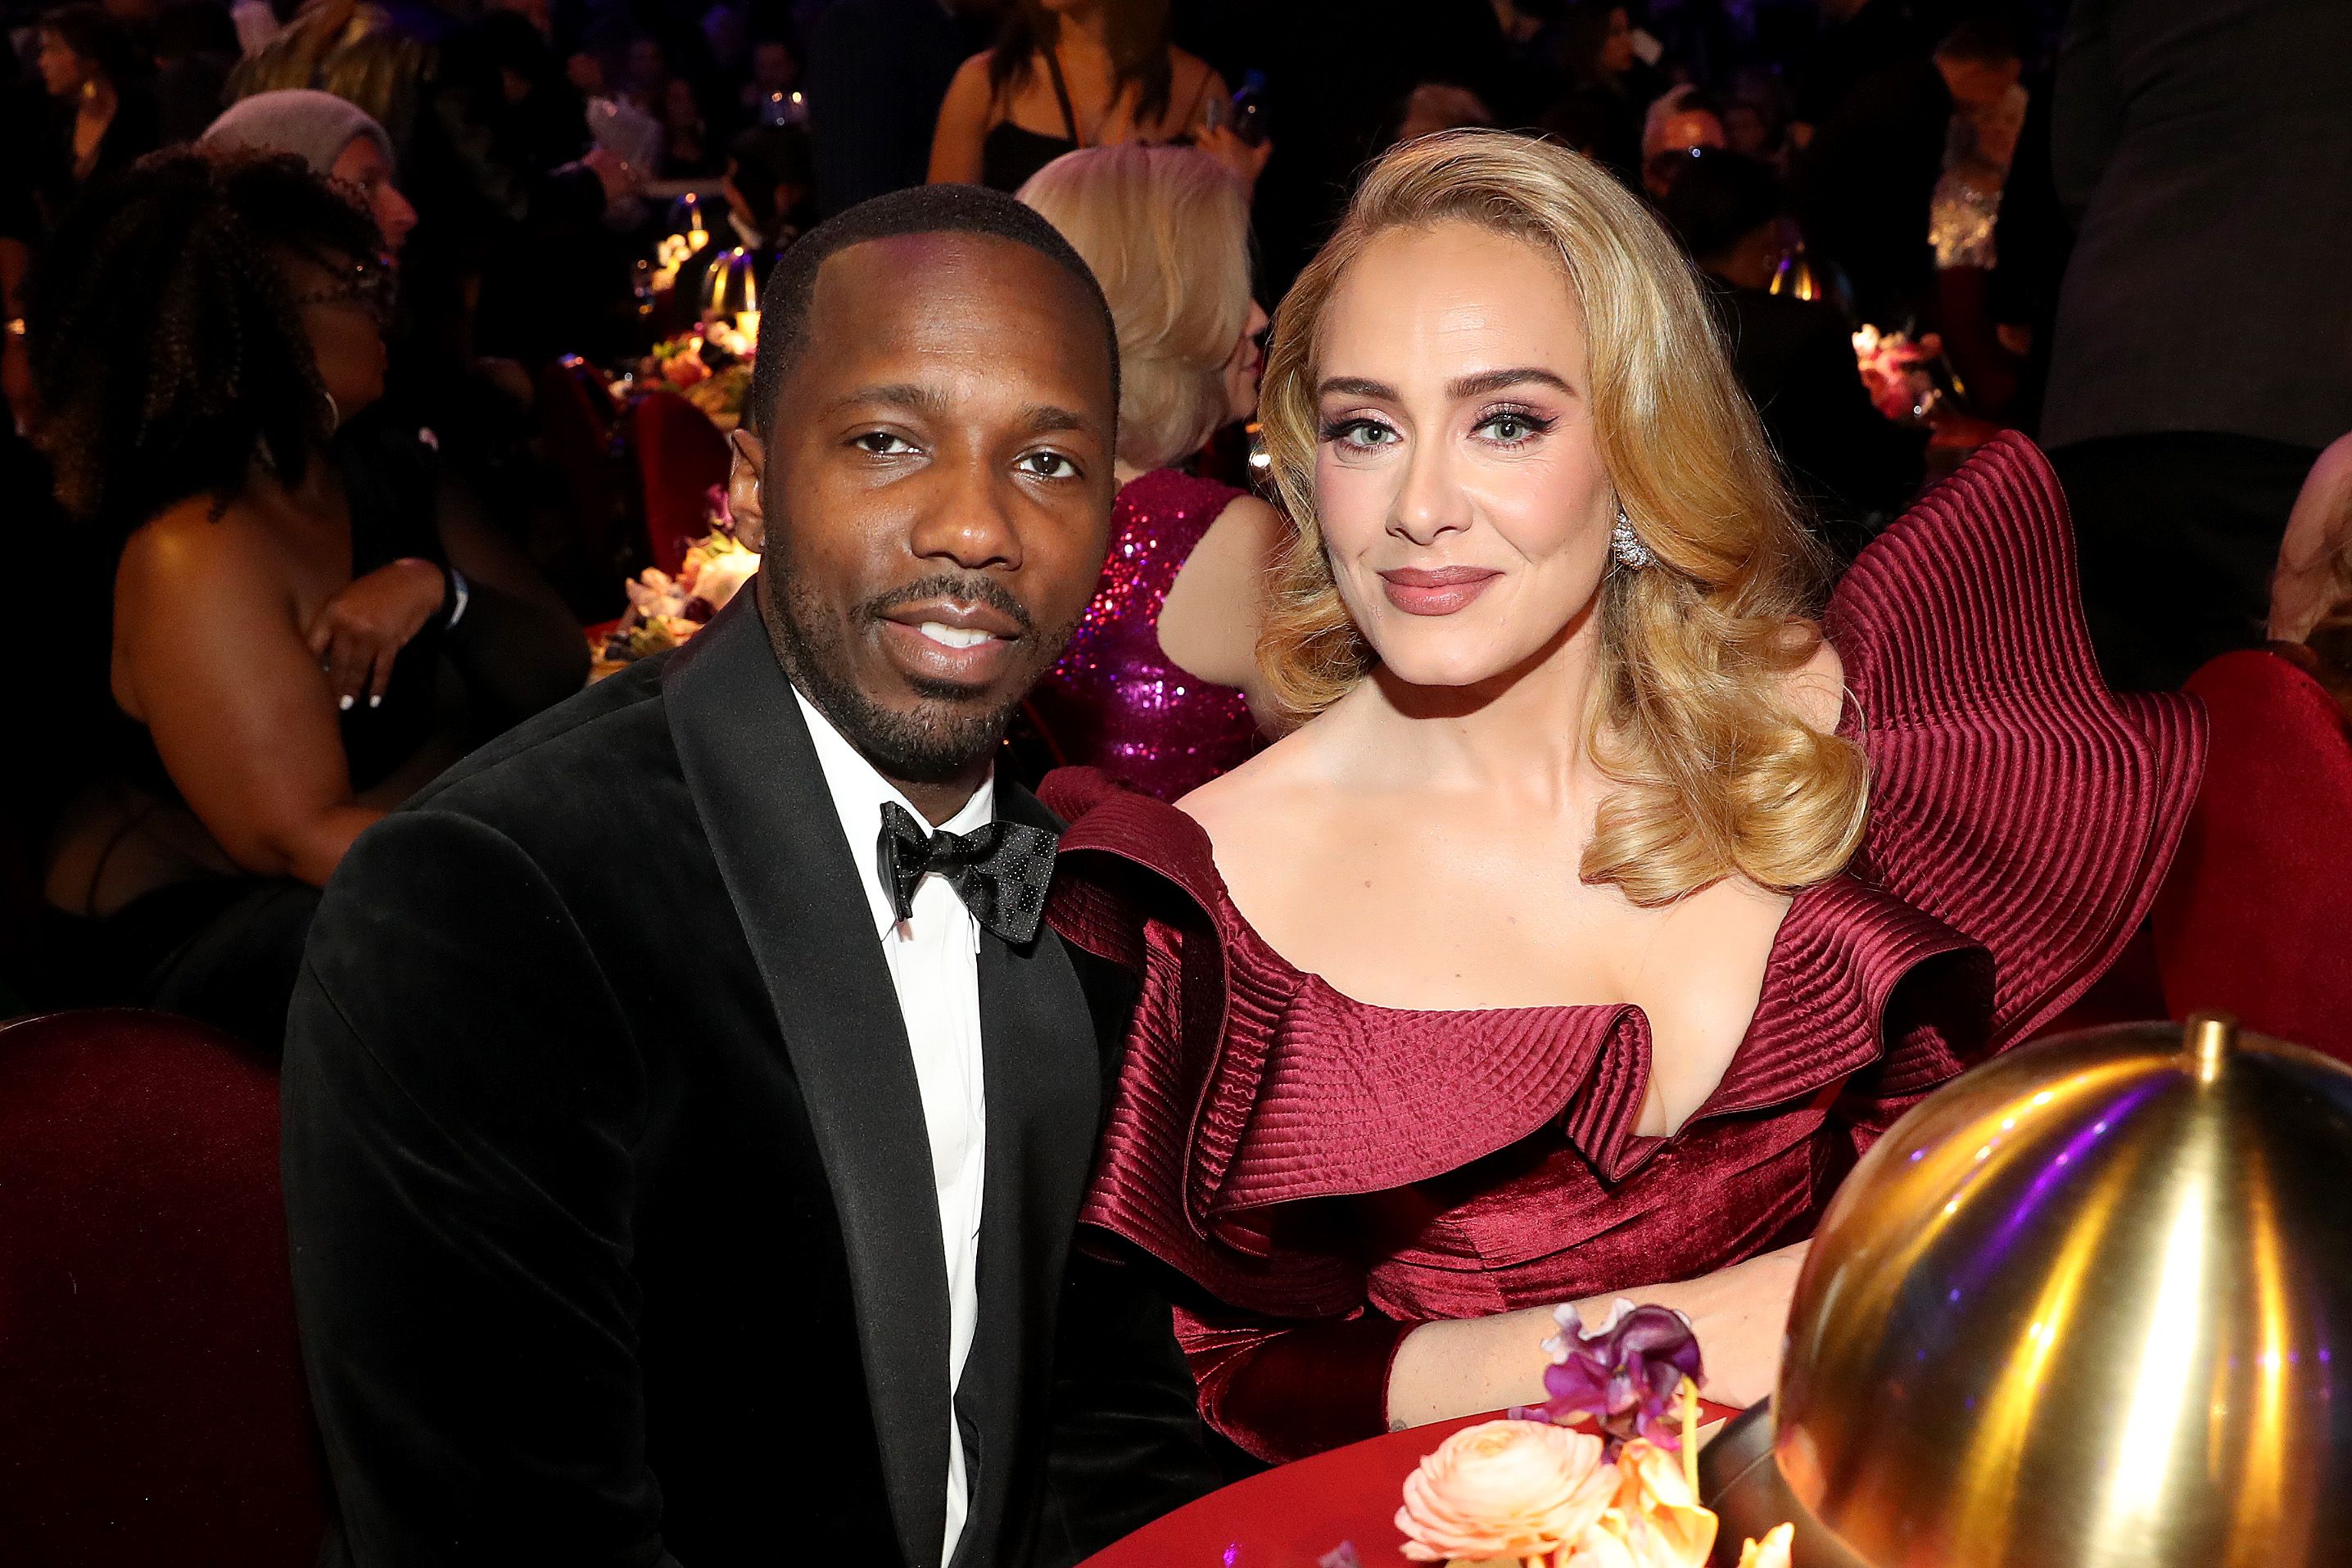 Who Is Adeles Boyfriend, Rich Paul? Their Full Relationship Timeline.